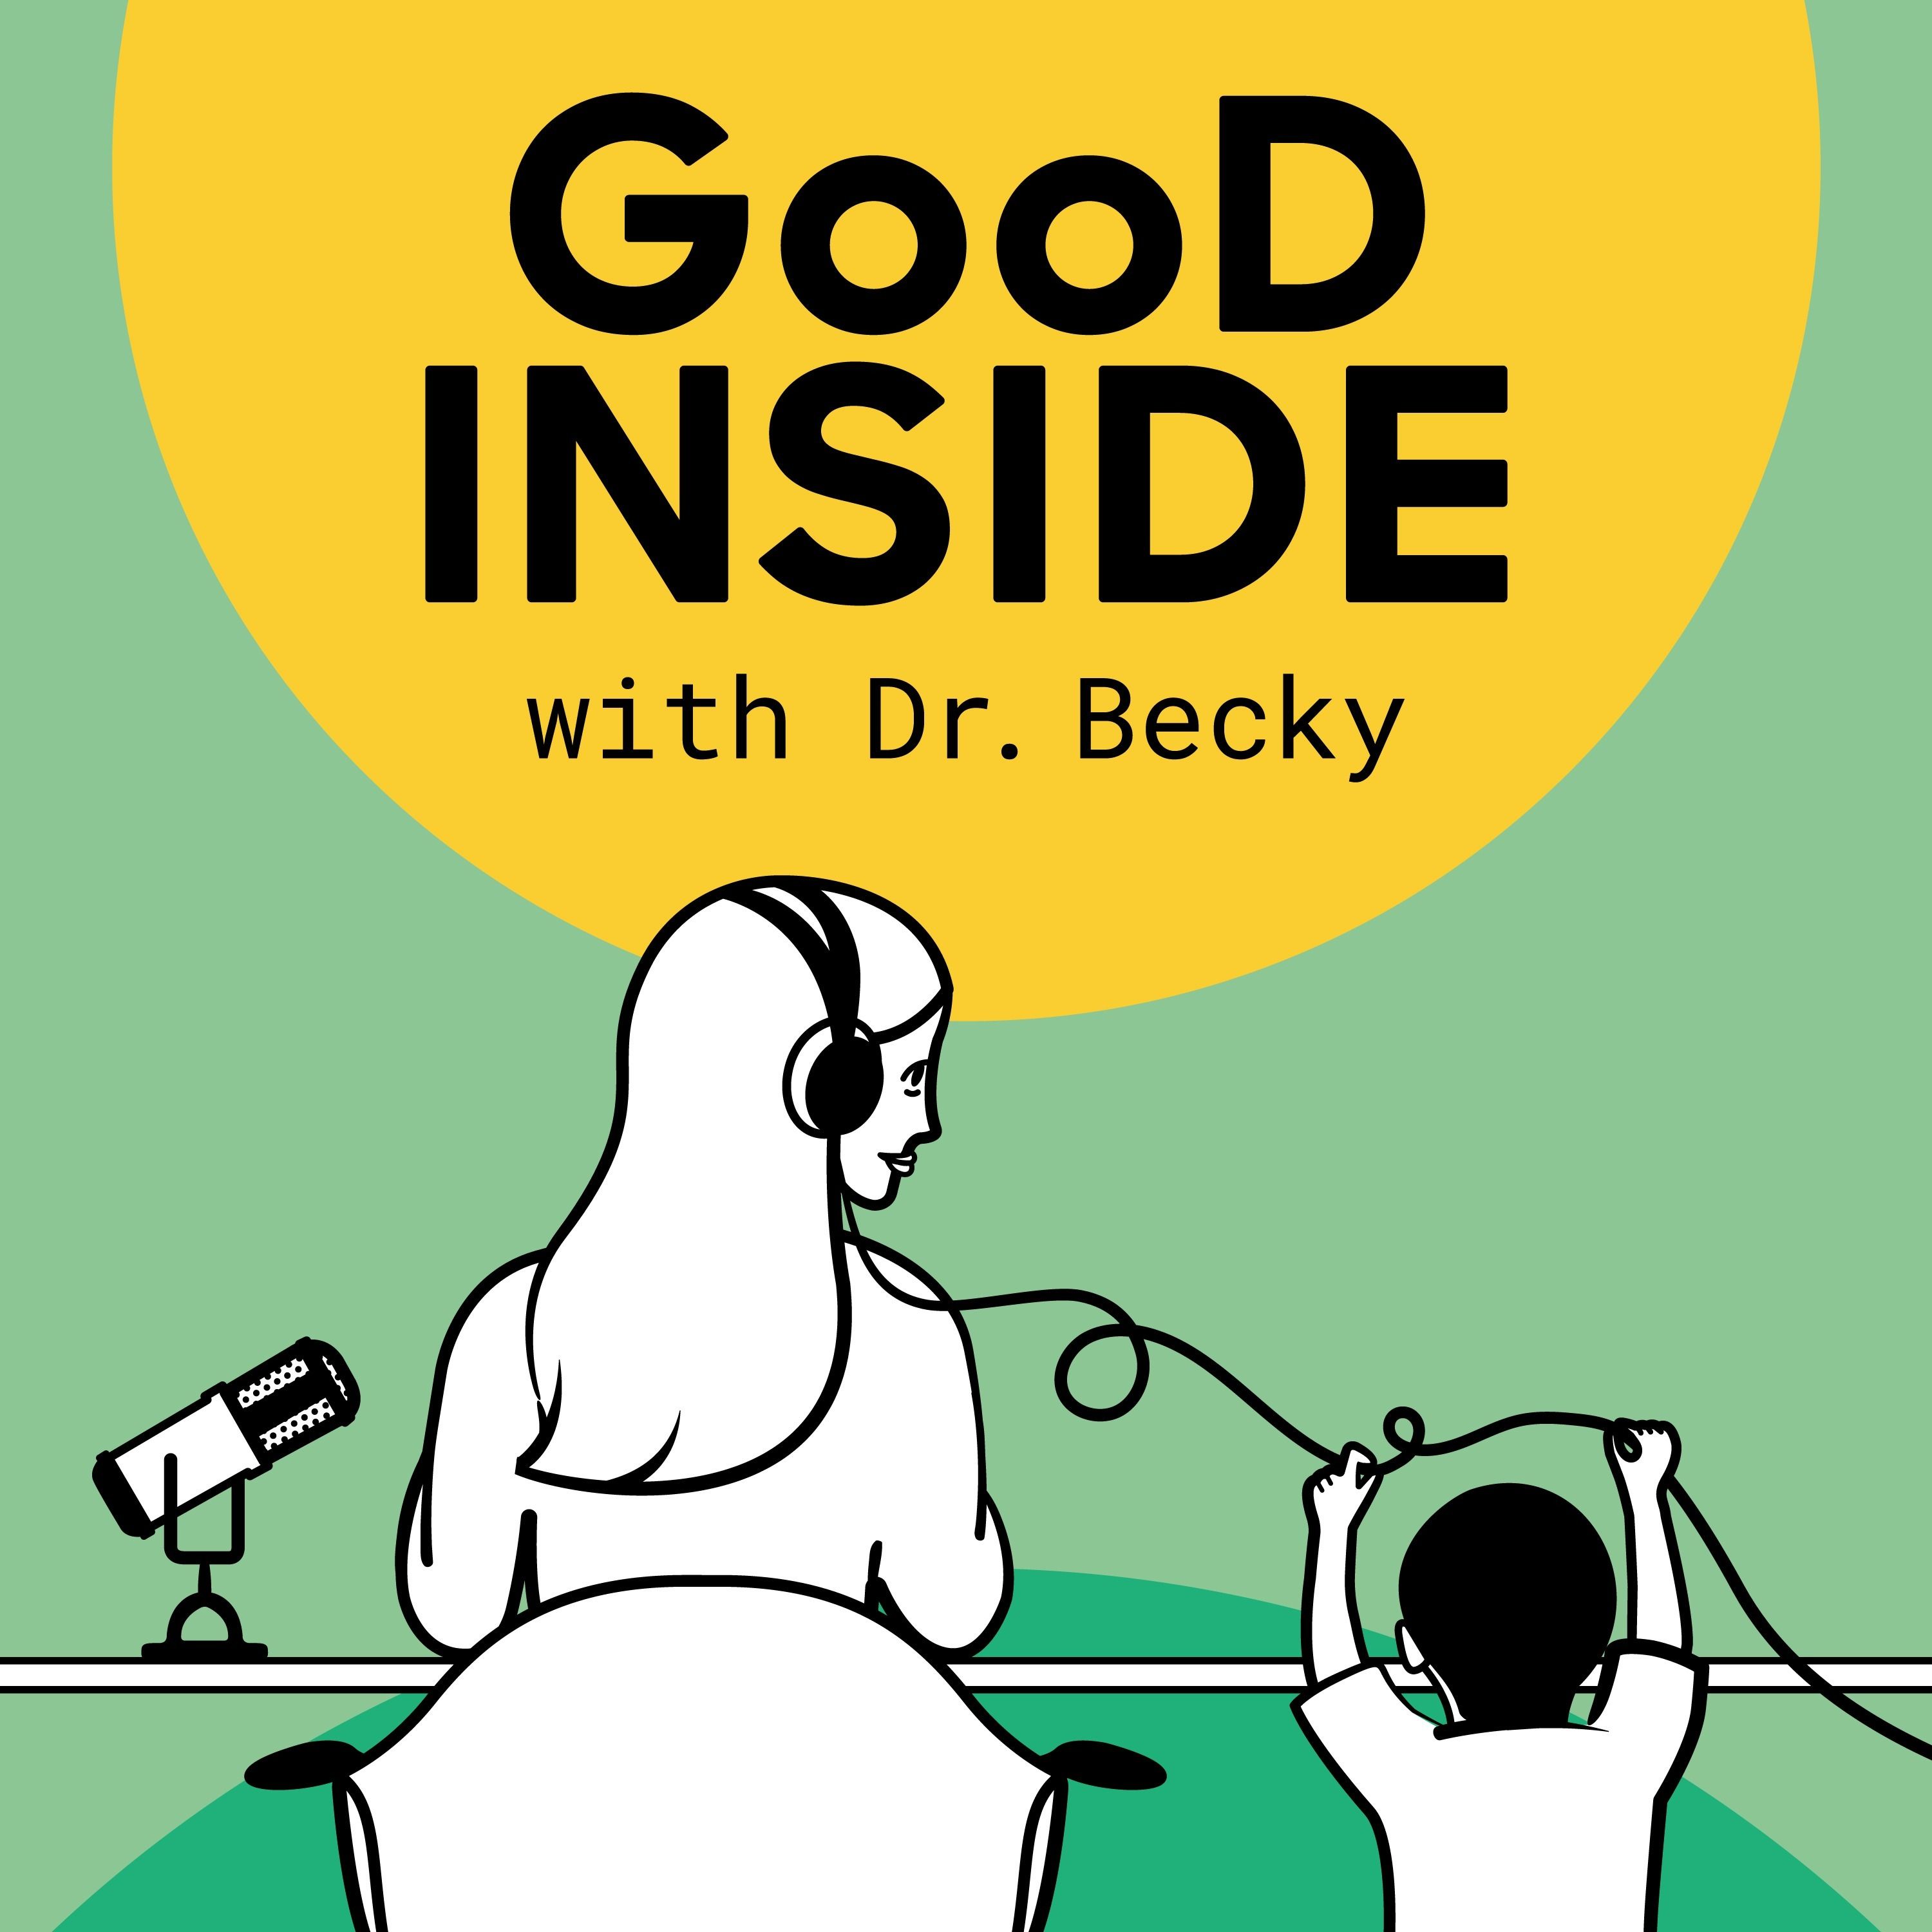 Good Inside with Dr. Becky